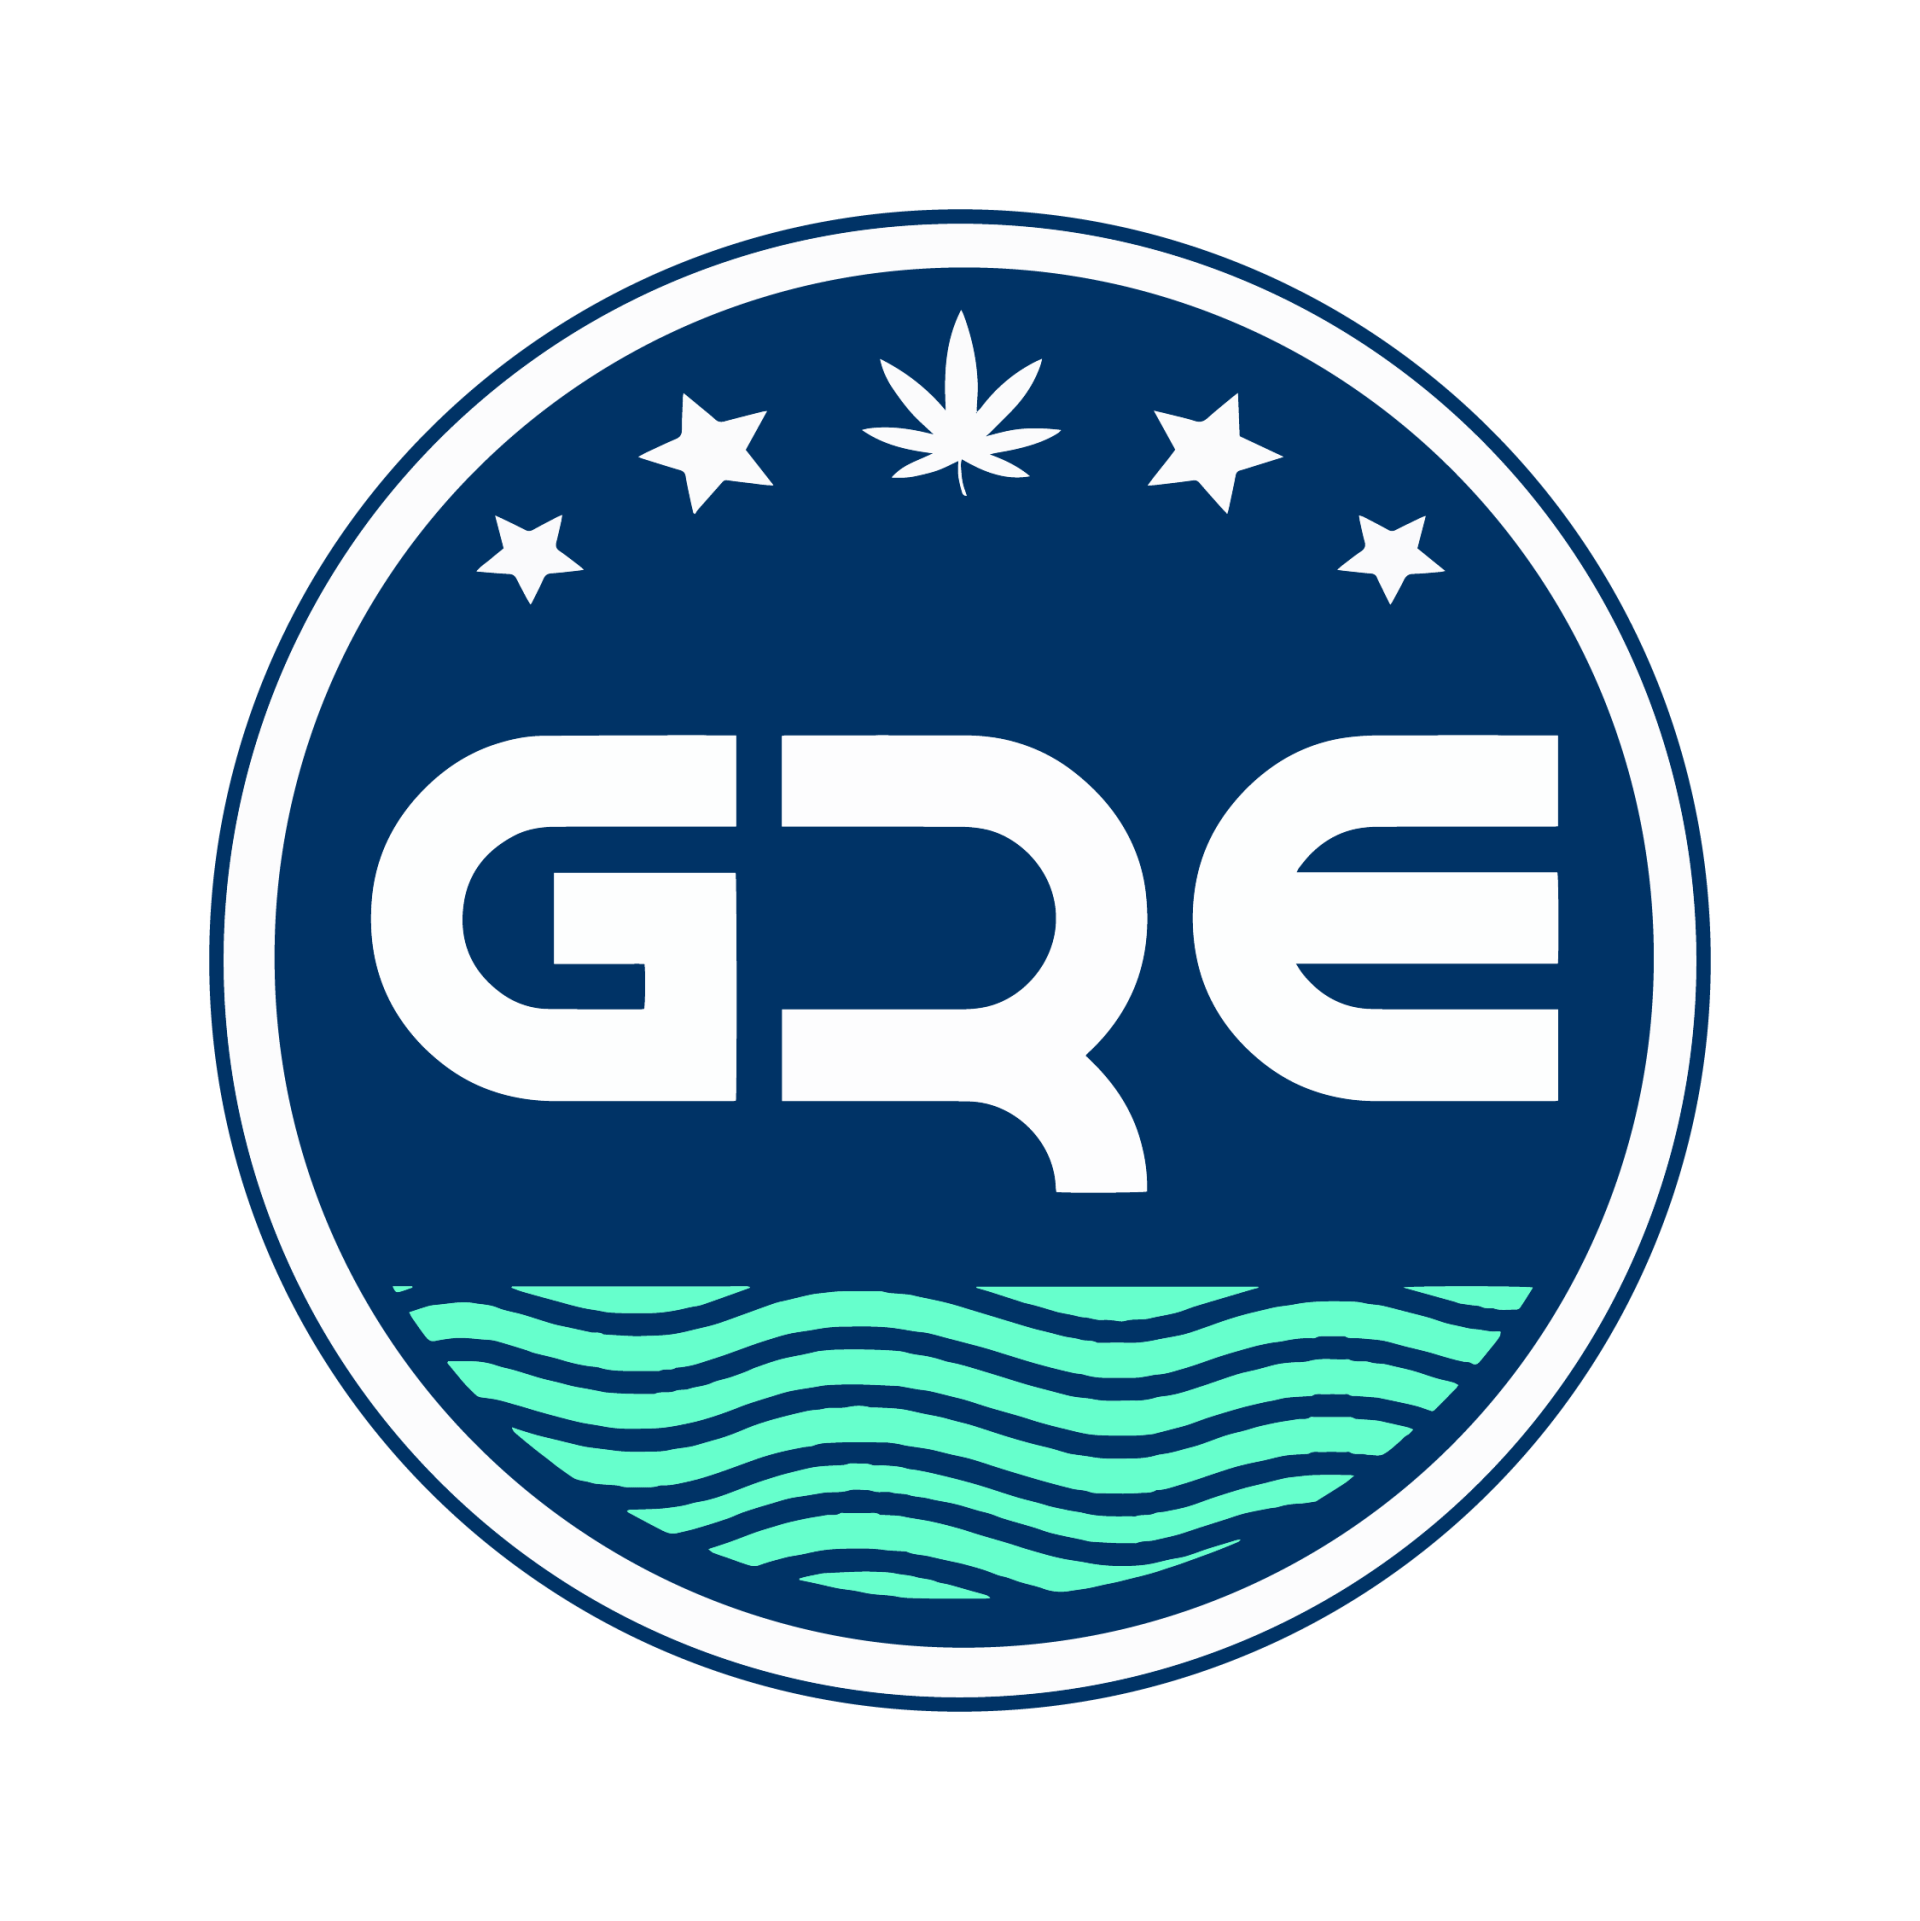 About Green River Extracts